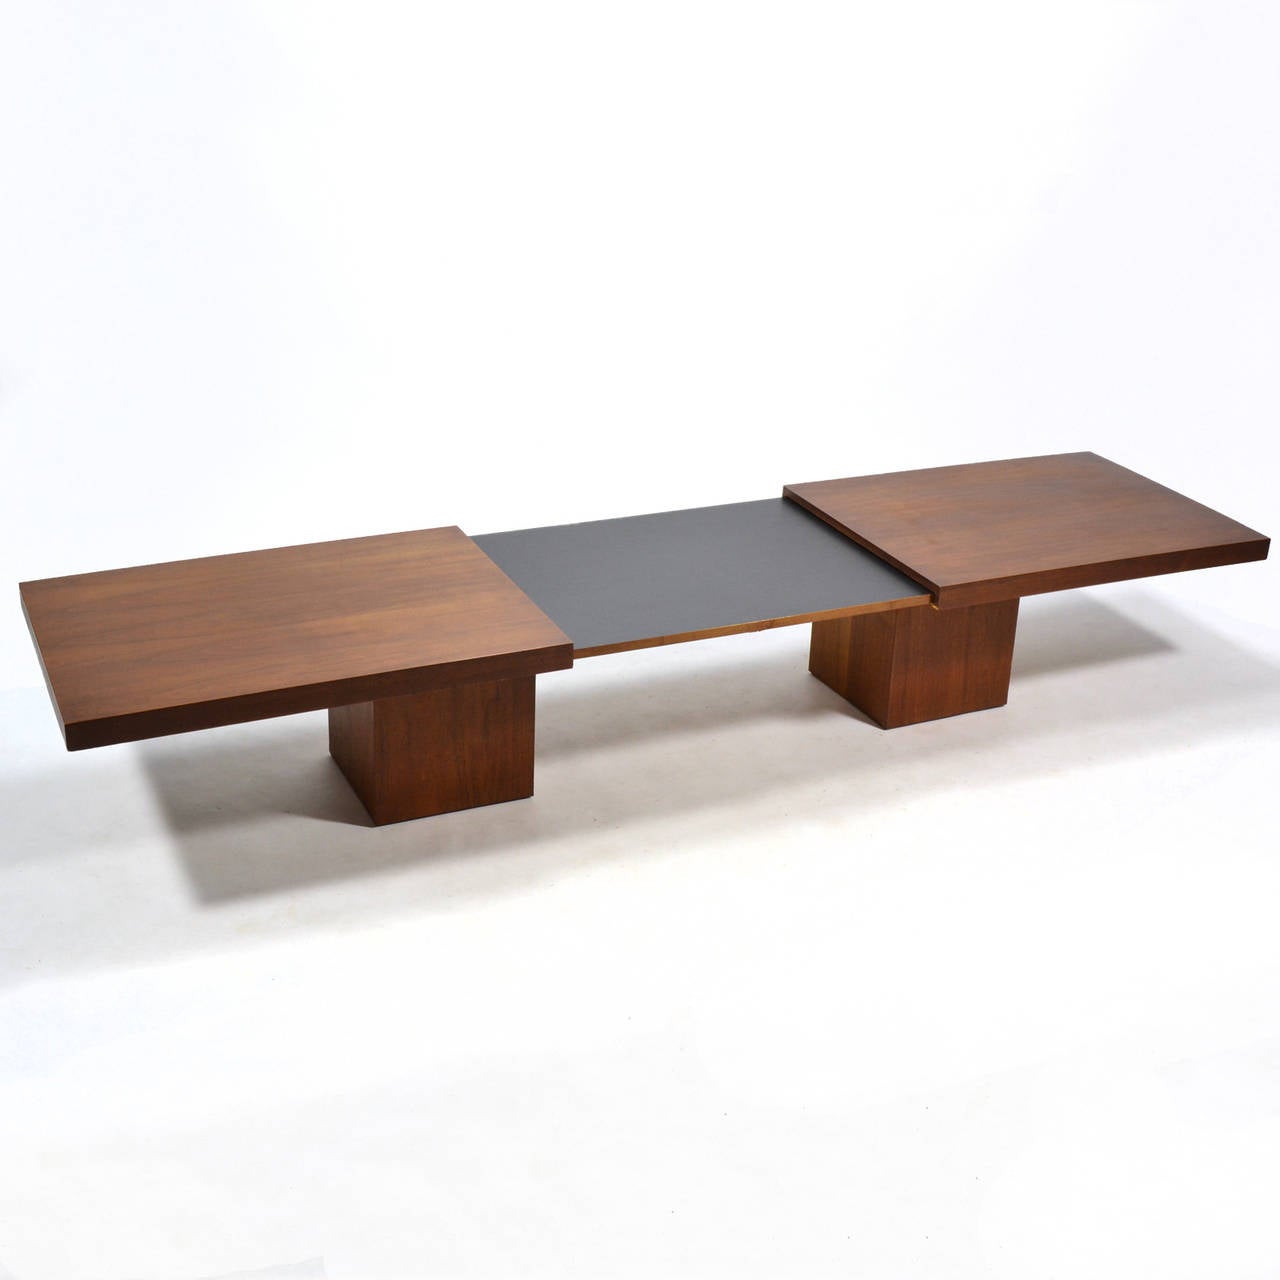 This beautiful design by John Keal is both handsome and versatile. The rectilinear top sits on a pair of cube bases offering a minimalist aesthetic… with a twist. The top is in two halves which separate and expand to reveal a center section of black